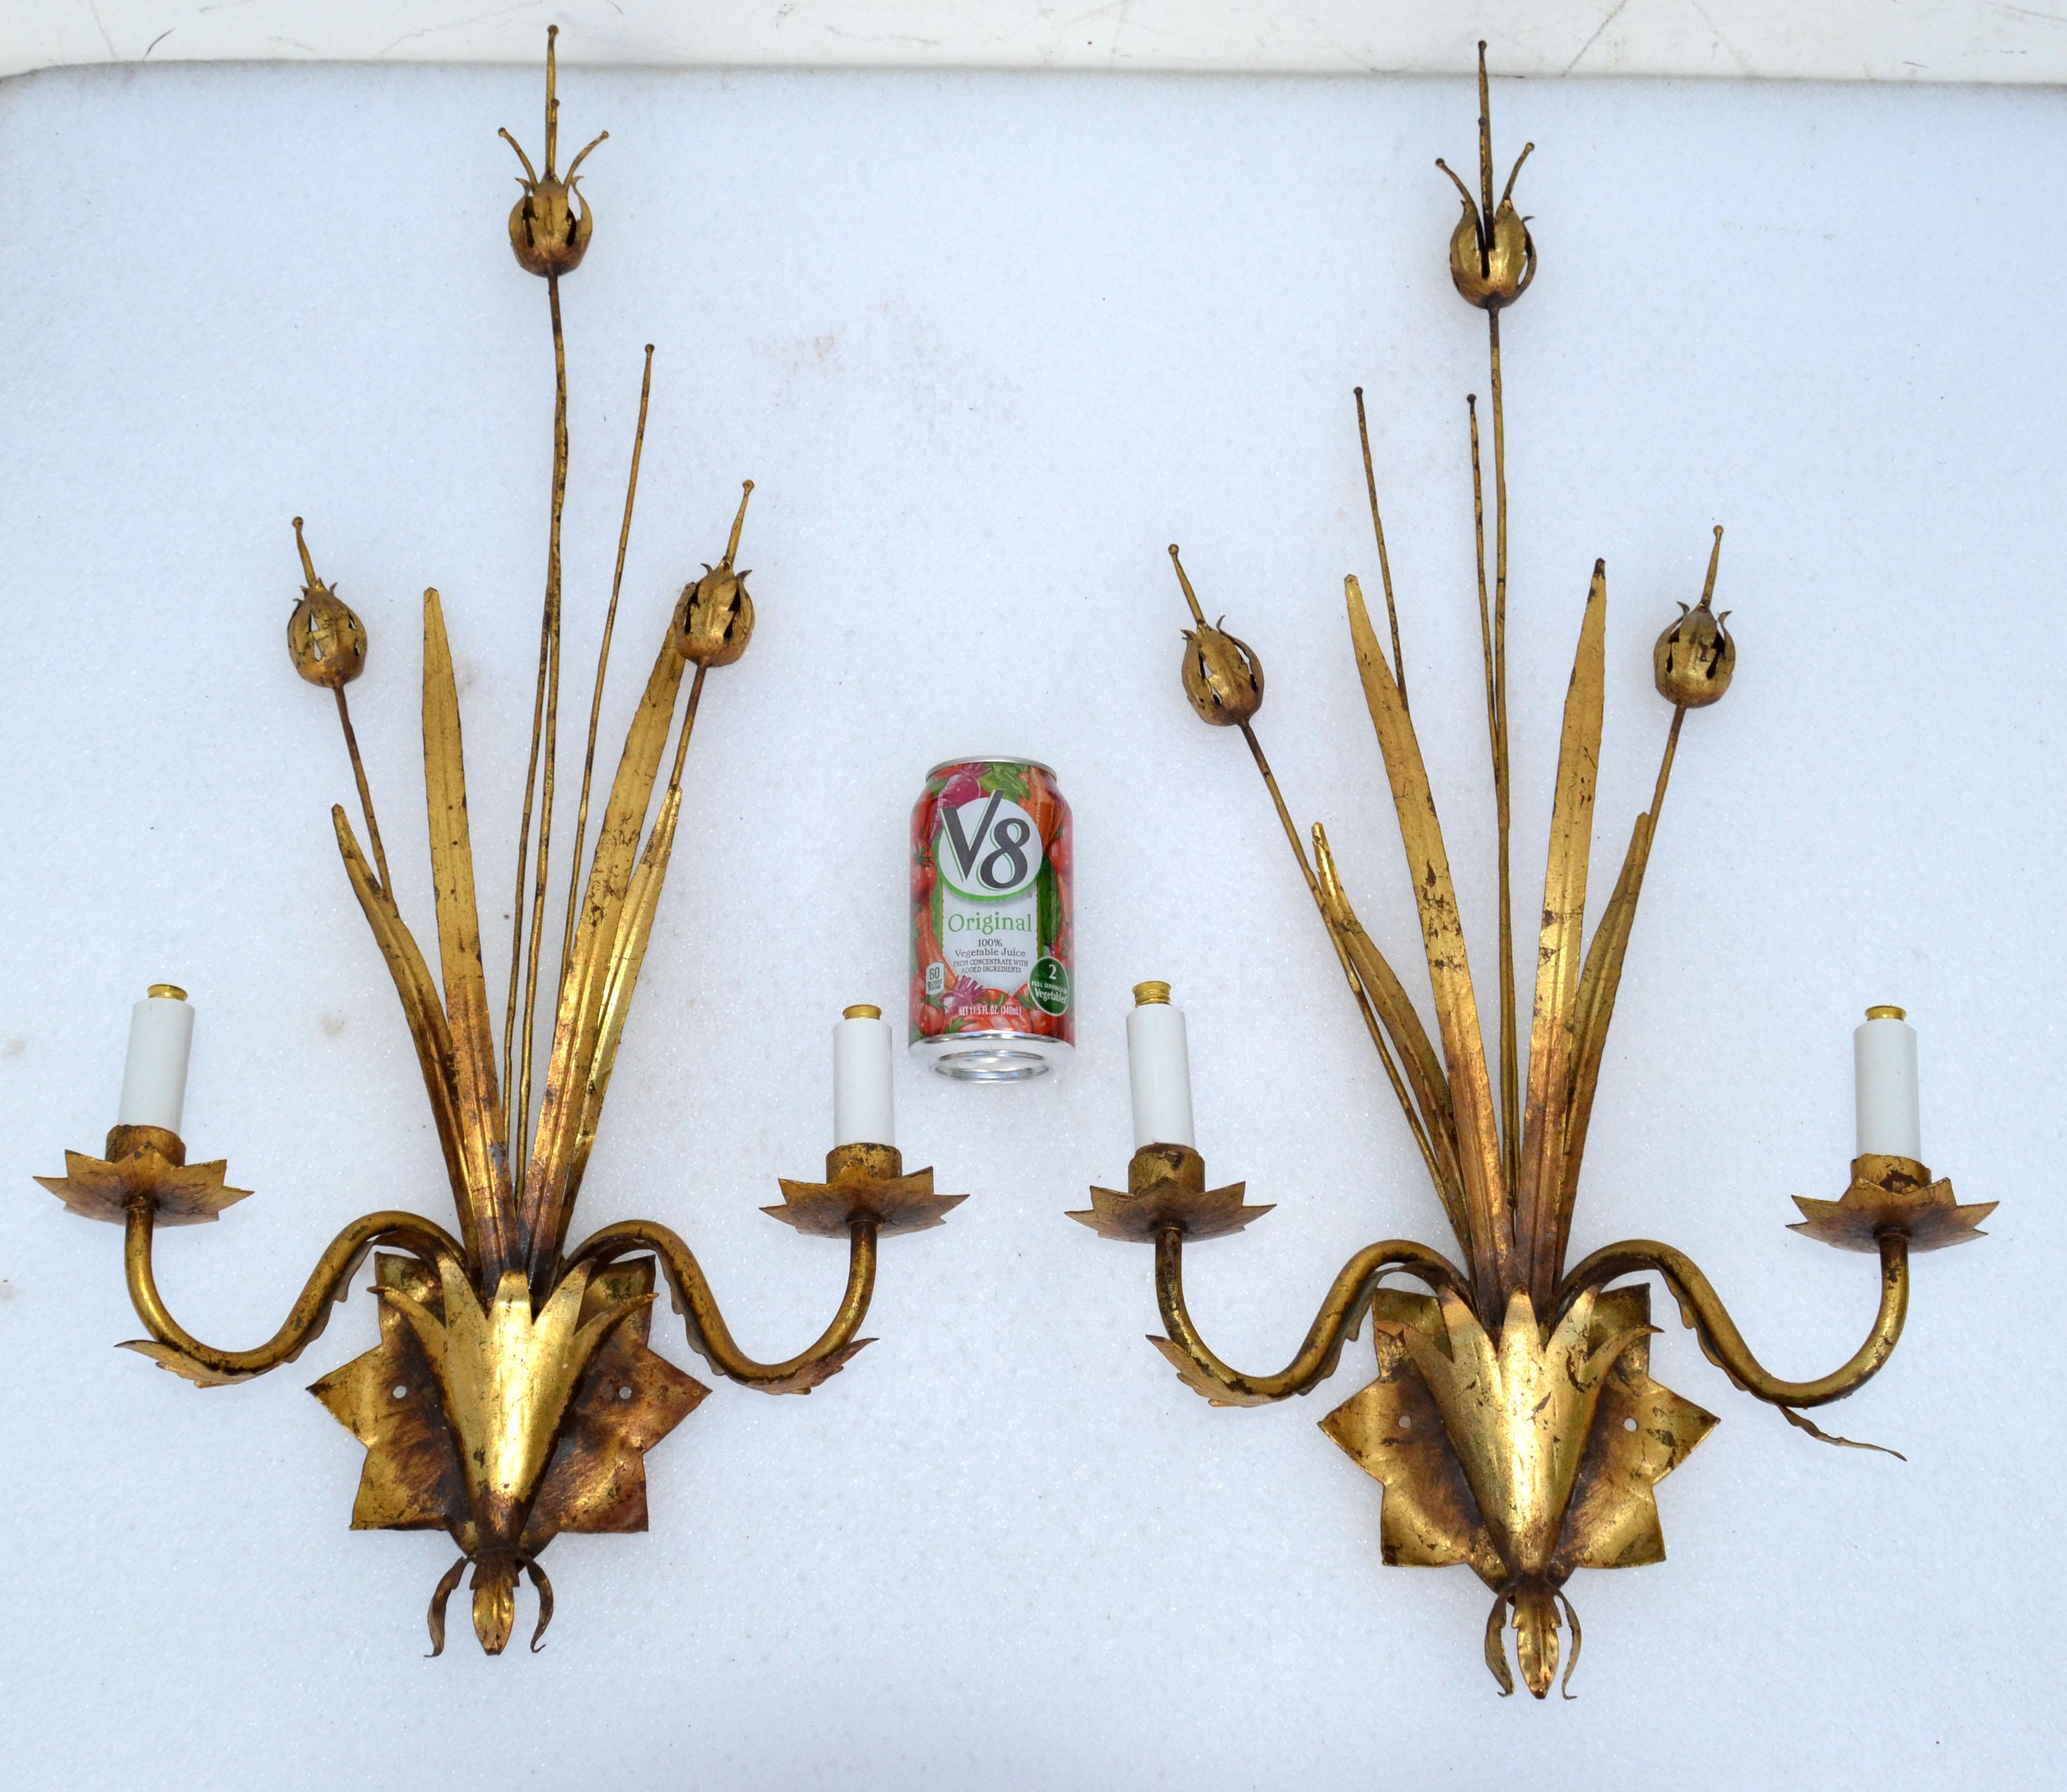 Pair of Large Ferrocolor Sconces Wheat Wall Lights Mid-Century Modern Spain 1960 For Sale 6